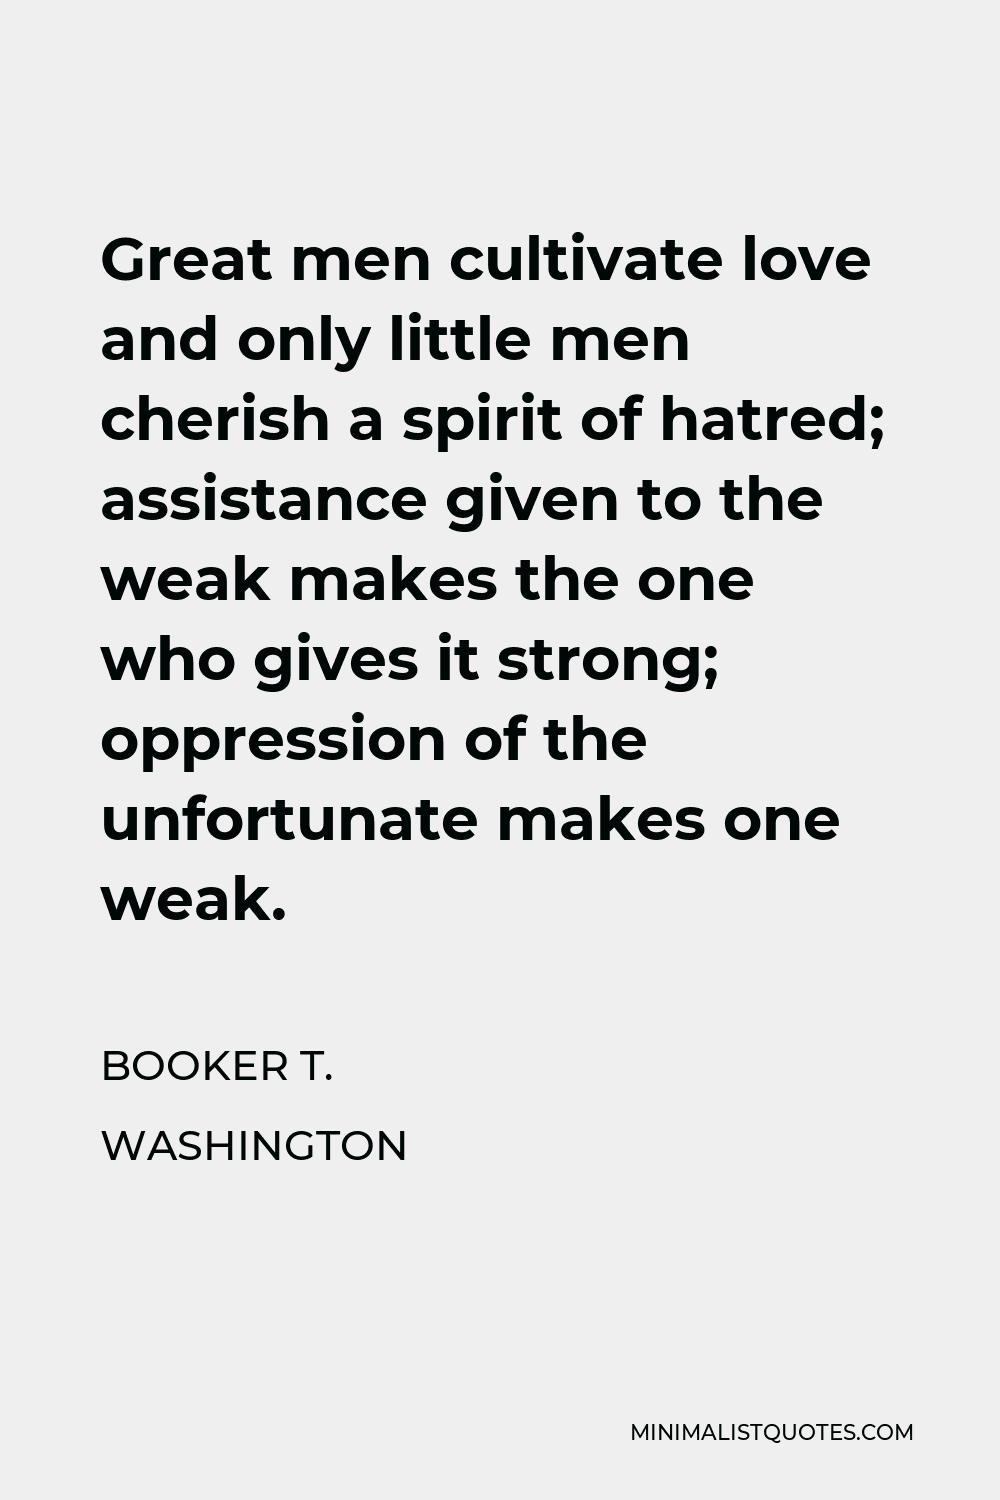 Booker T. Washington Quote - Great men cultivate love and only little men cherish a spirit of hatred; assistance given to the weak makes the one who gives it strong; oppression of the unfortunate makes one weak.